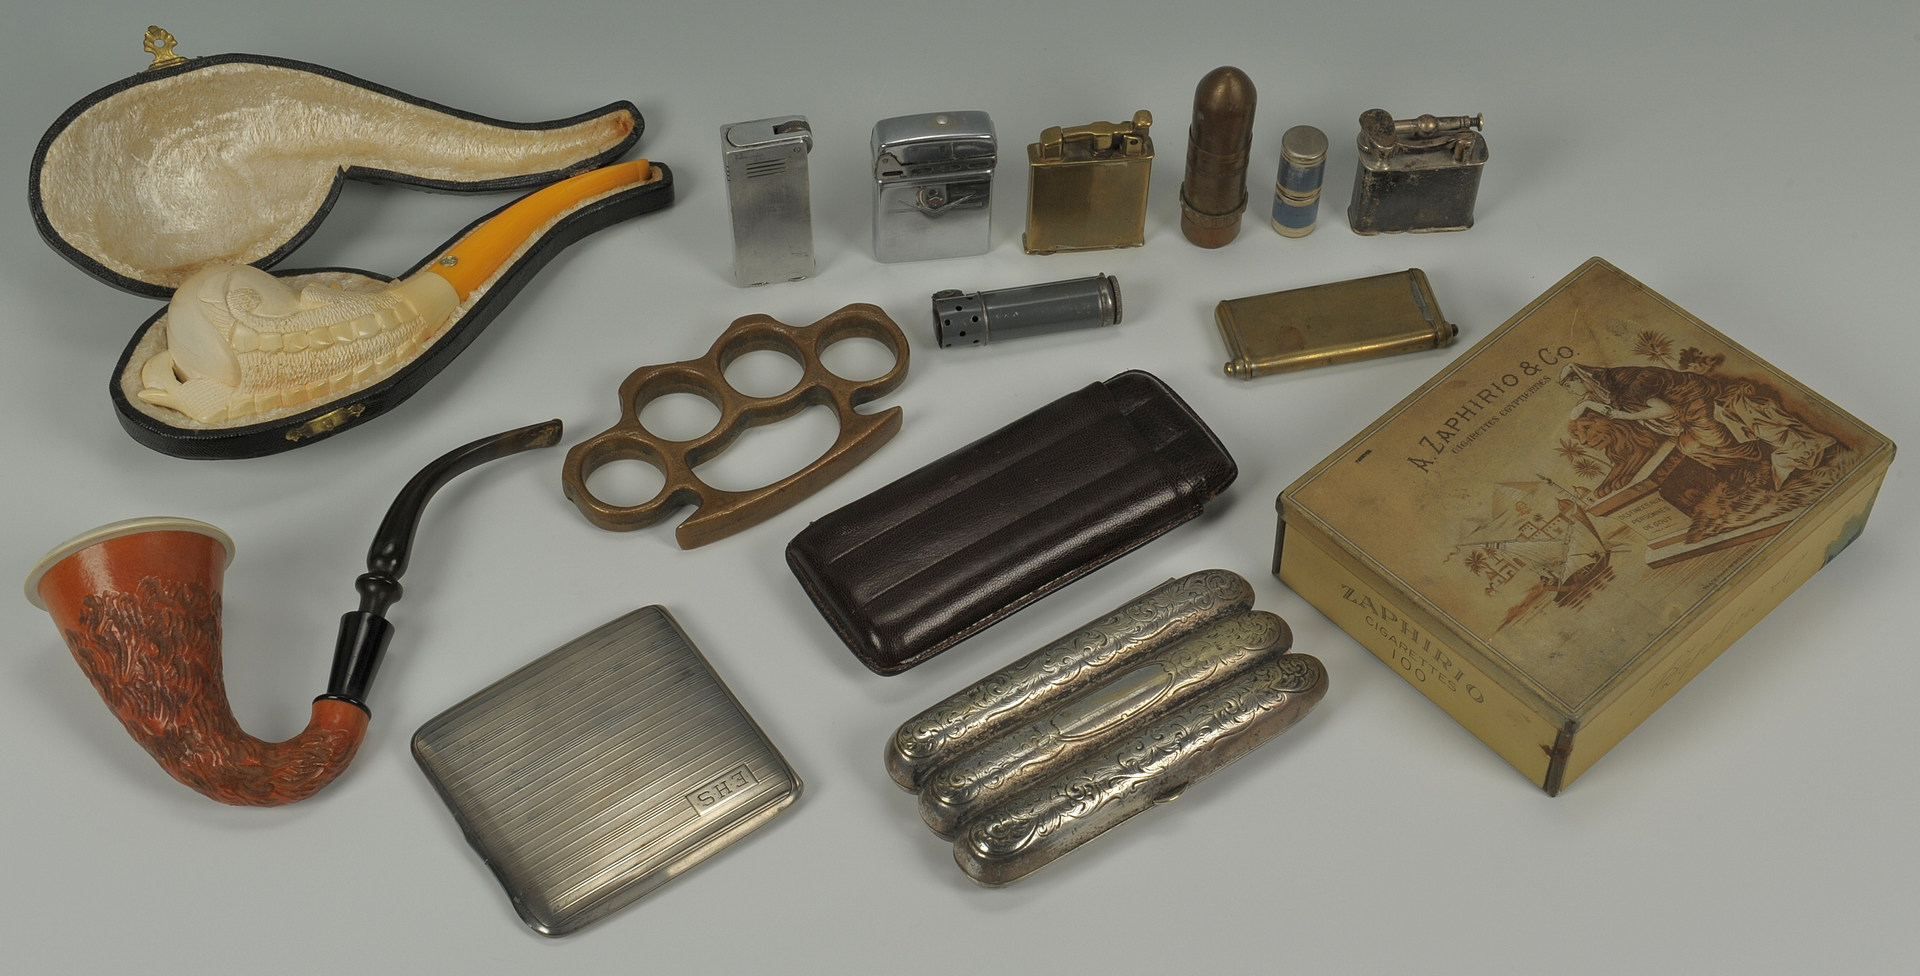 Lot 374: Lot of smoking related items and pr brass knuckles